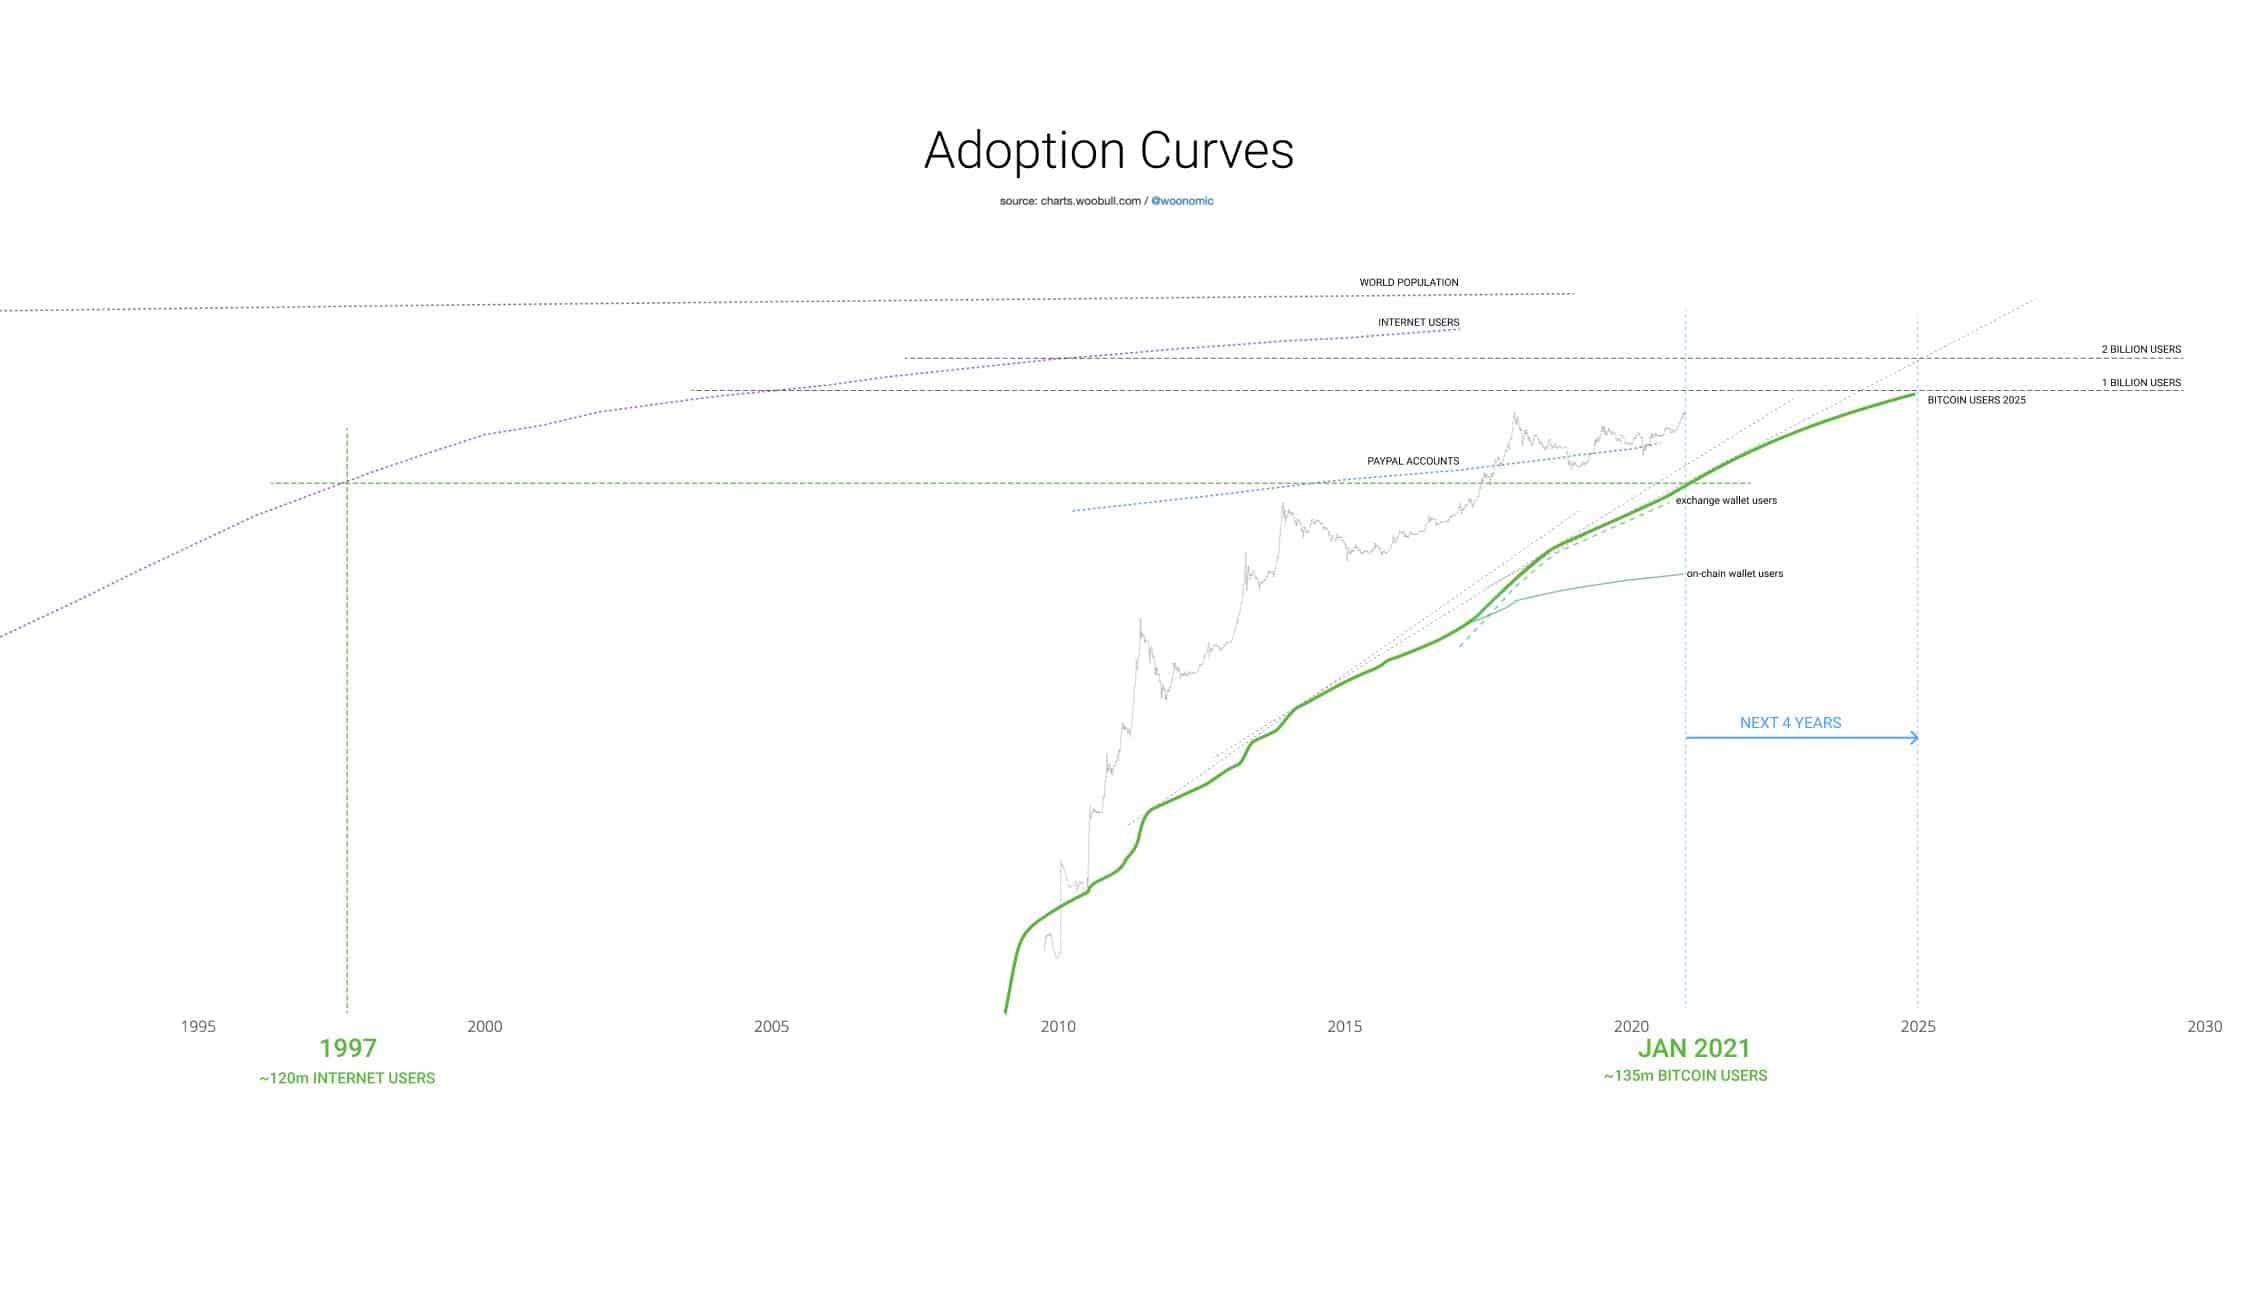 Adoption Rate: Bitcoin Vs The Internet. Source: Twitter